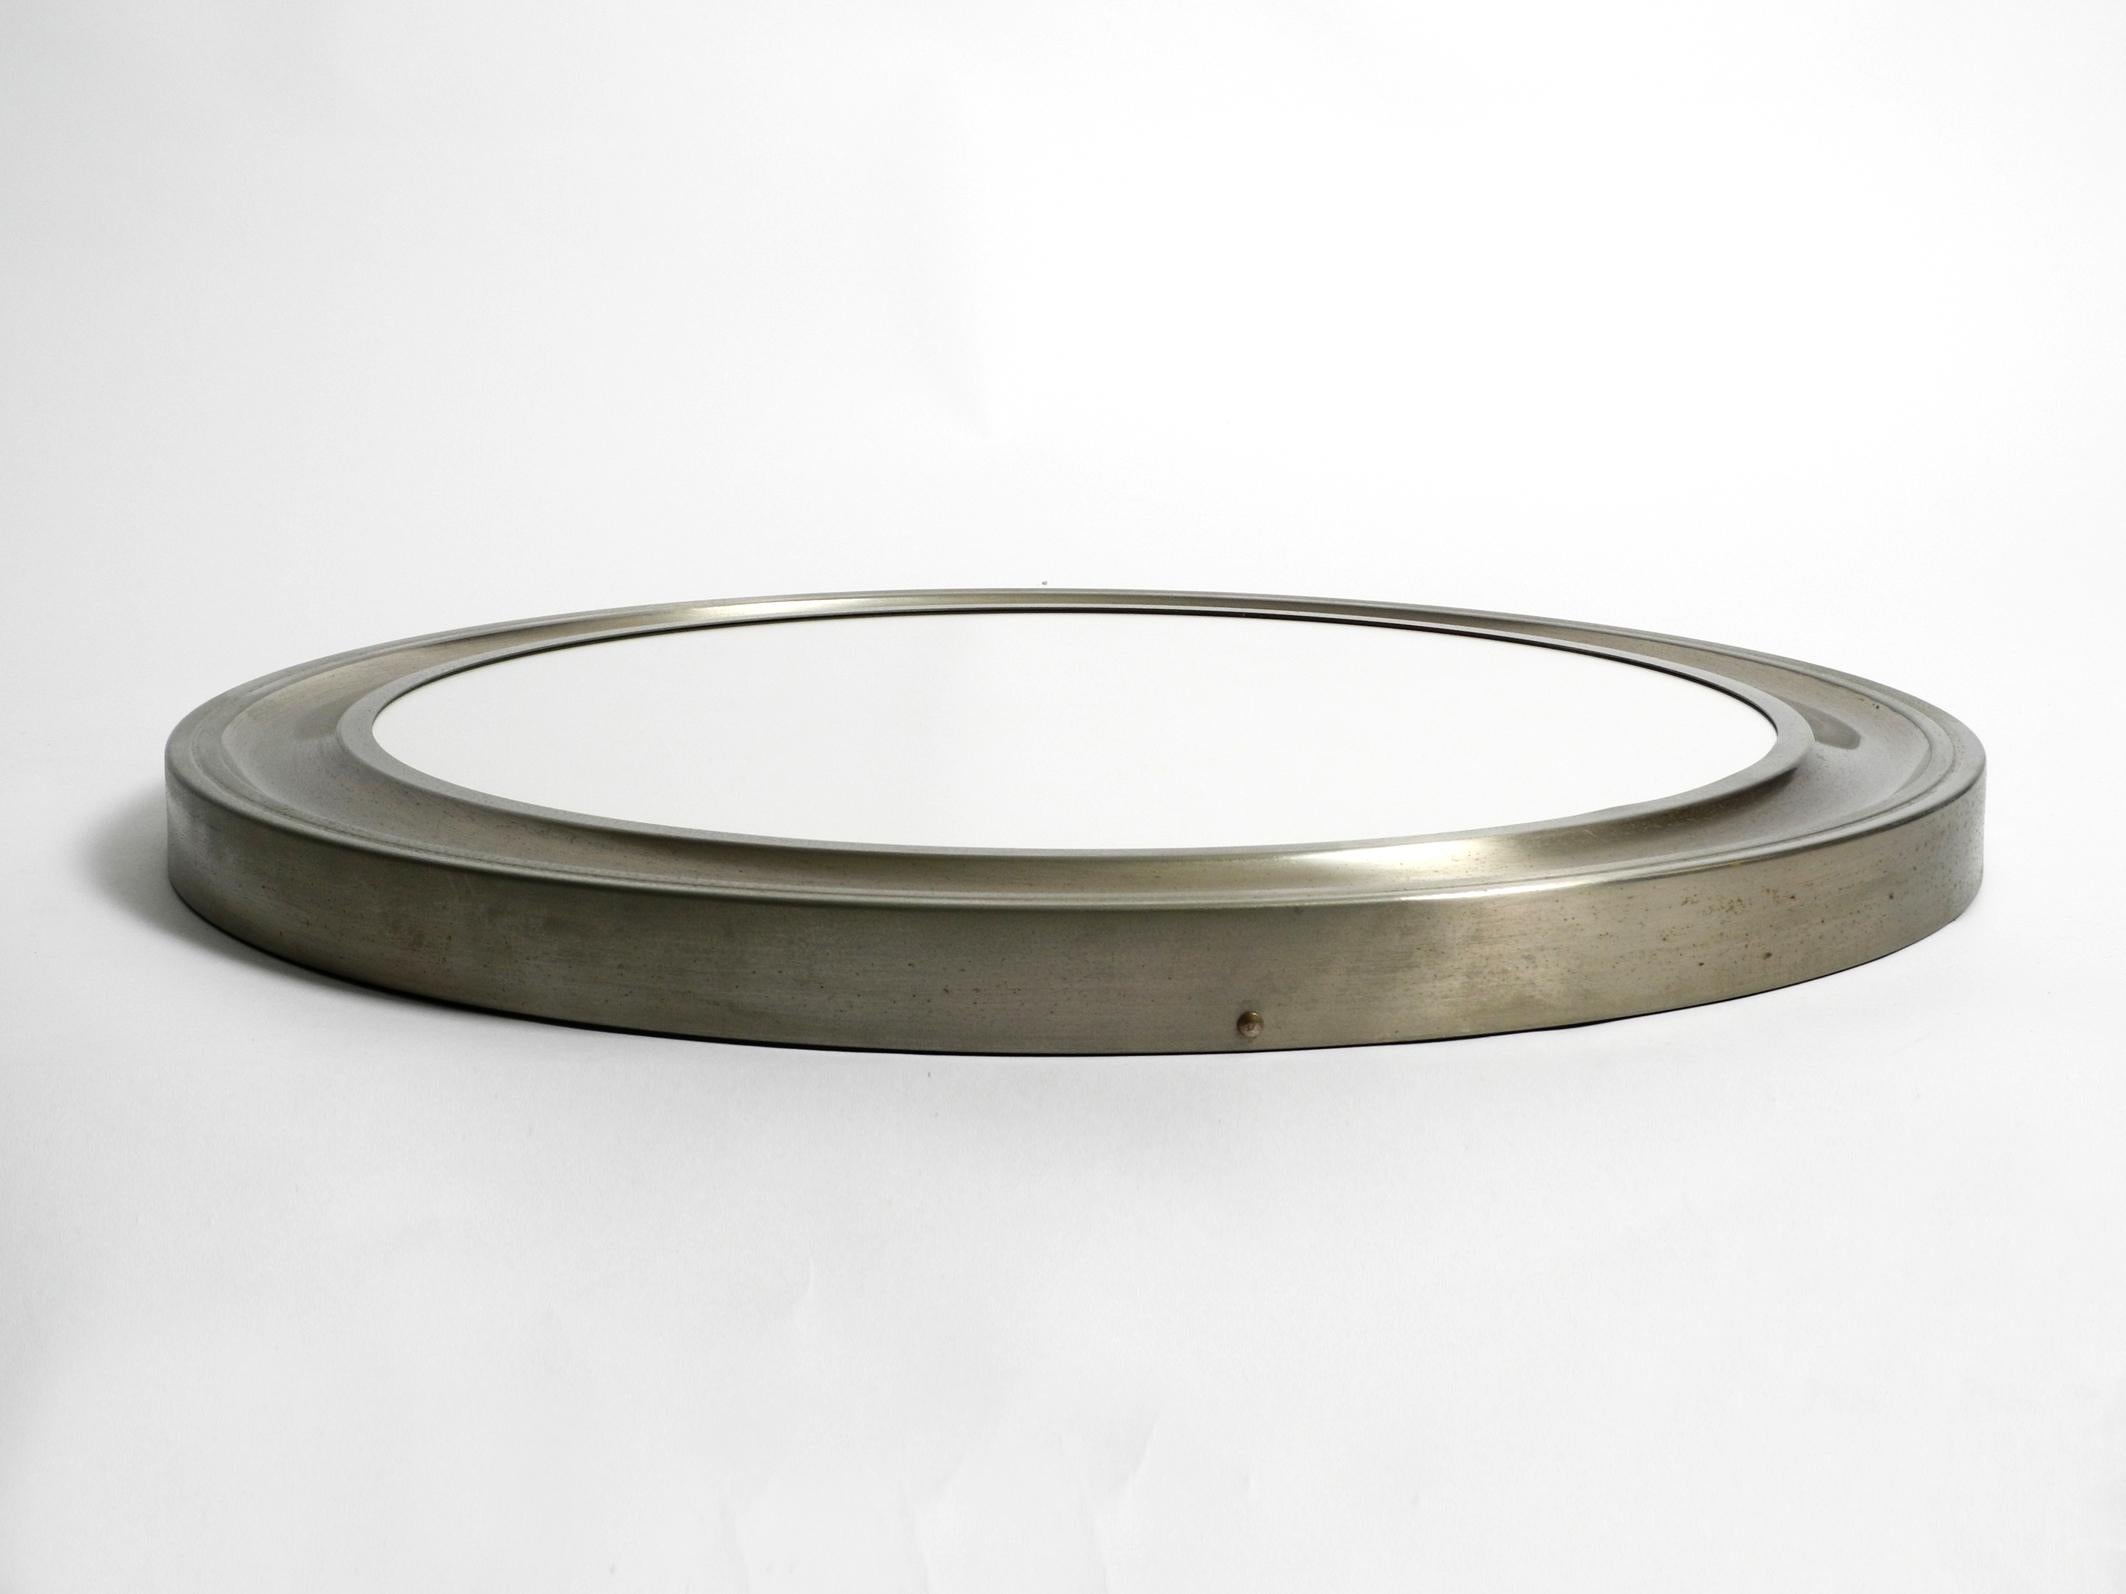 Space Age Beautiful Round Heavy 1960s Nickel Narcisso Mirror by Sergio Mazza for Artemide